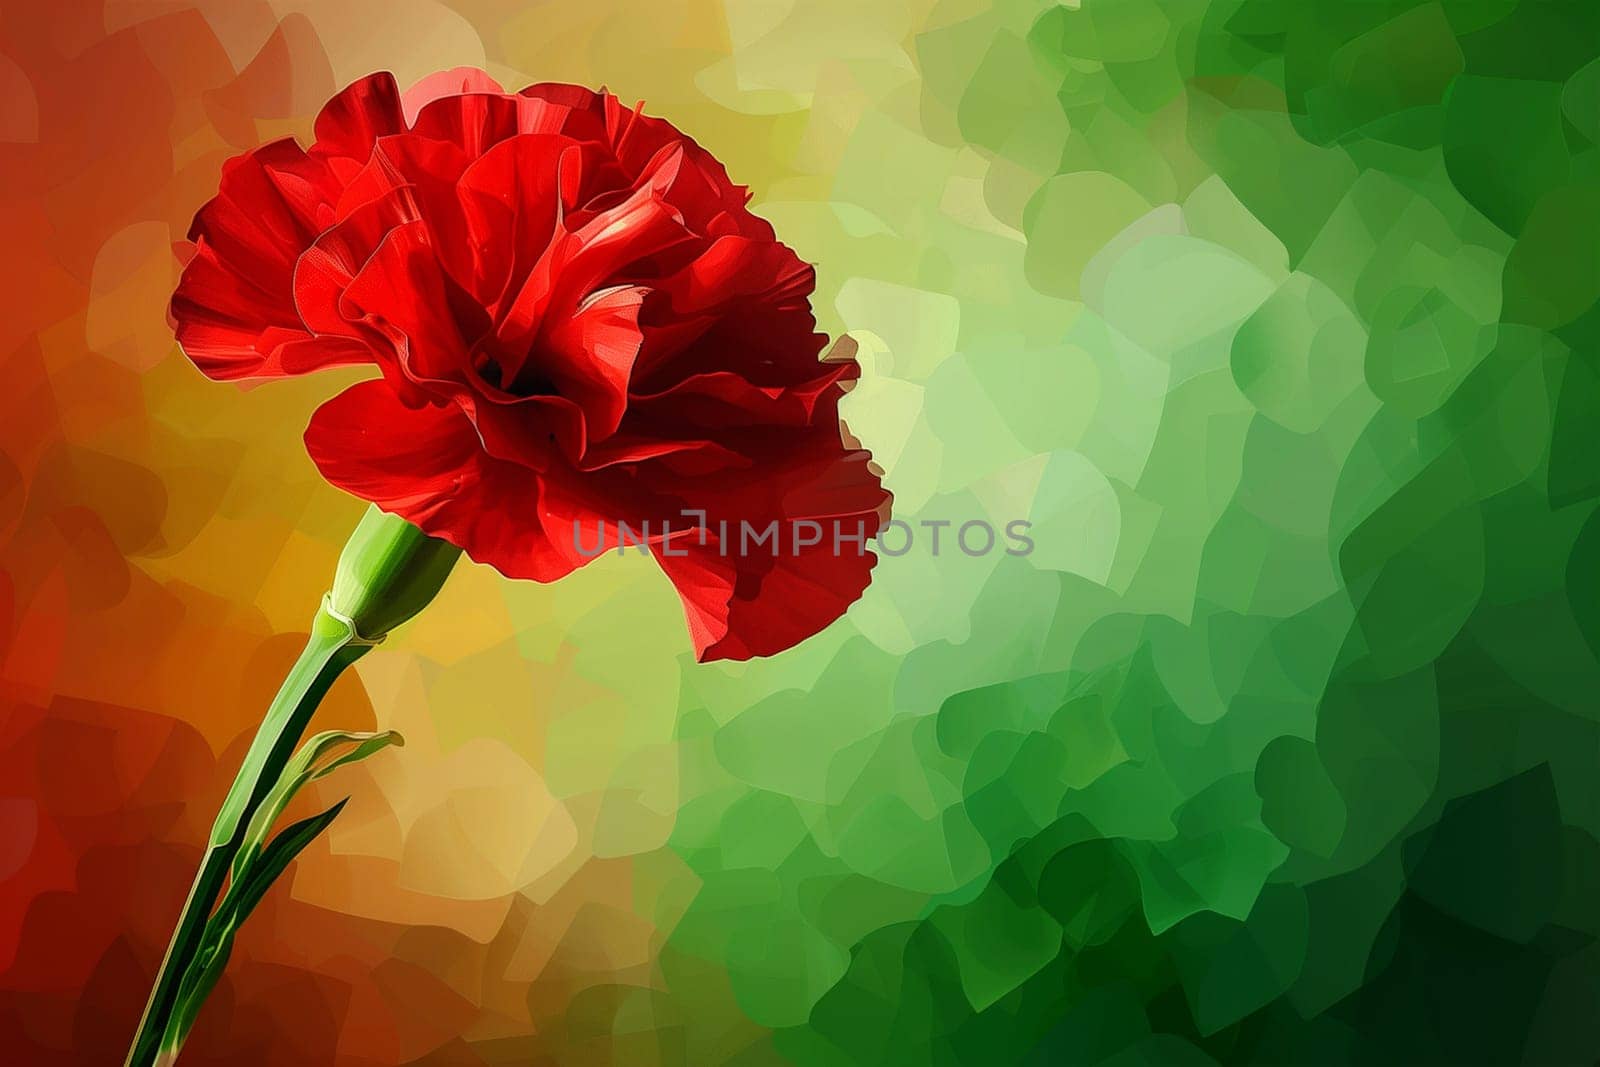 Vibrant Red Carnation Blooming Against a Colorful Background for Portugal Day by Sd28DimoN_1976